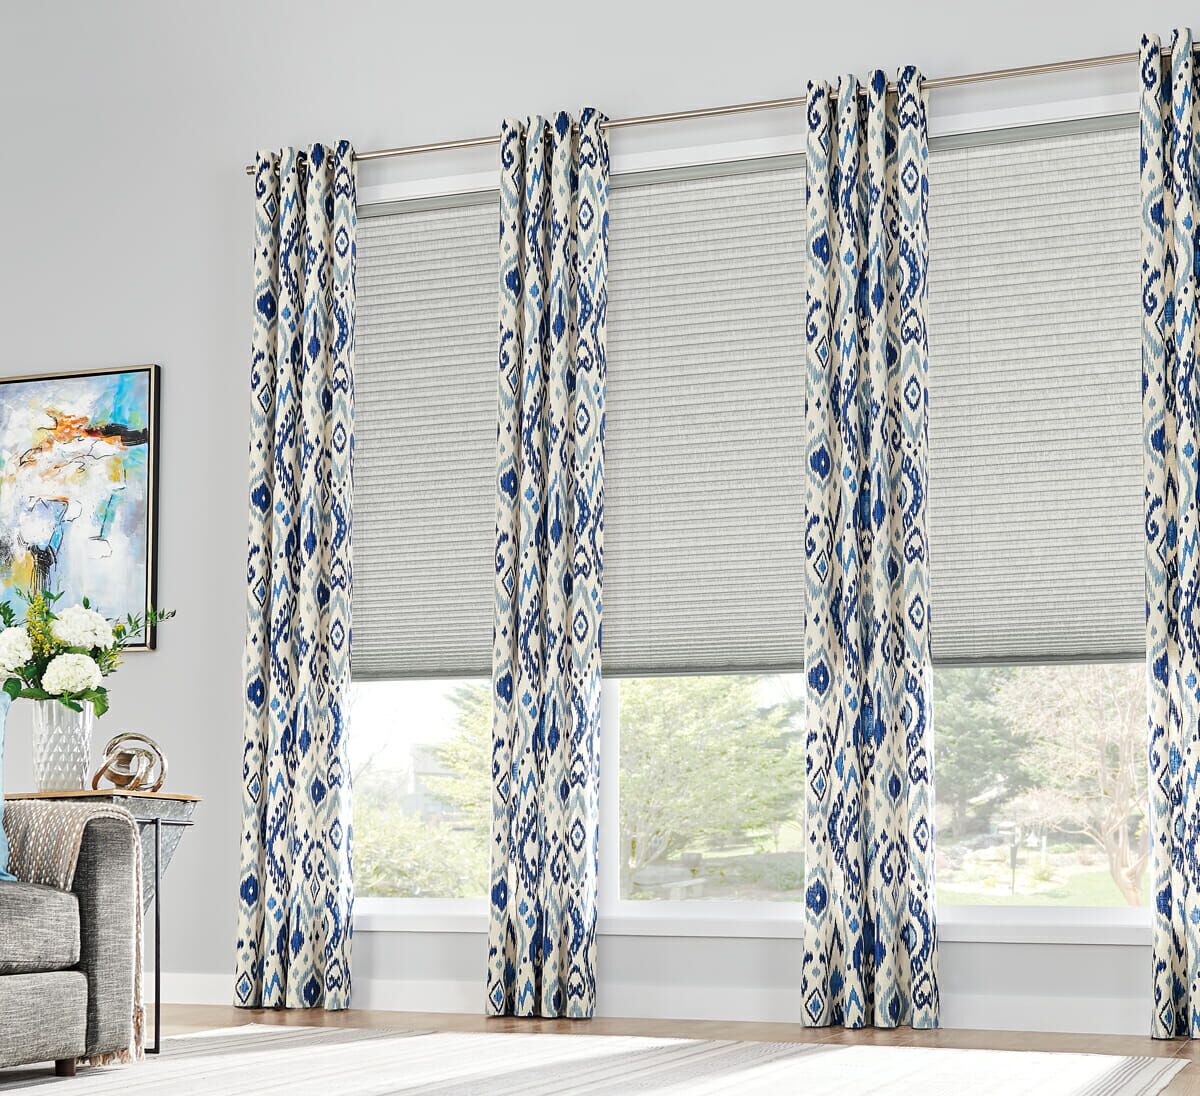 Contrast between solid-color cellular shades and patterned curtains